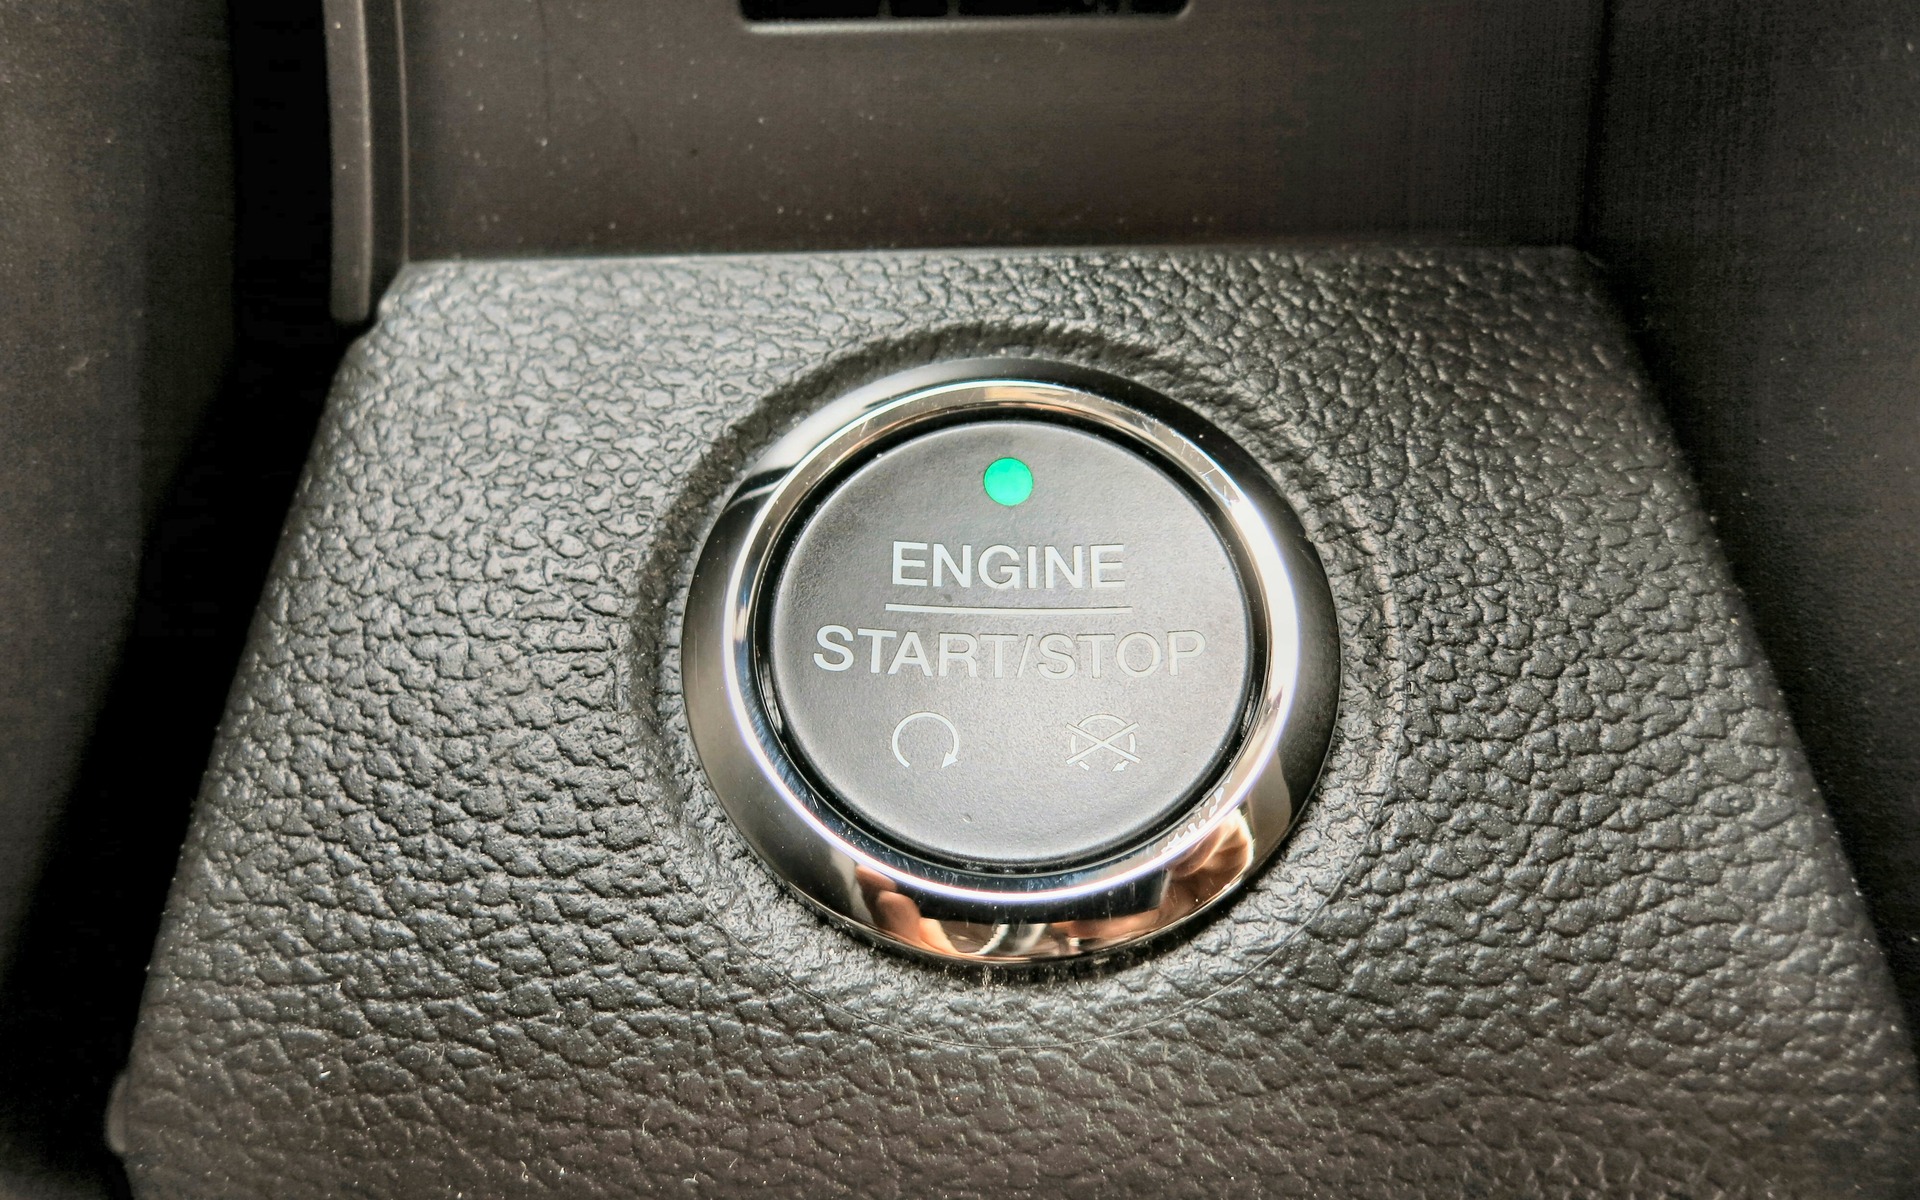 Keyless entry and ignition came with my Lariat tester.